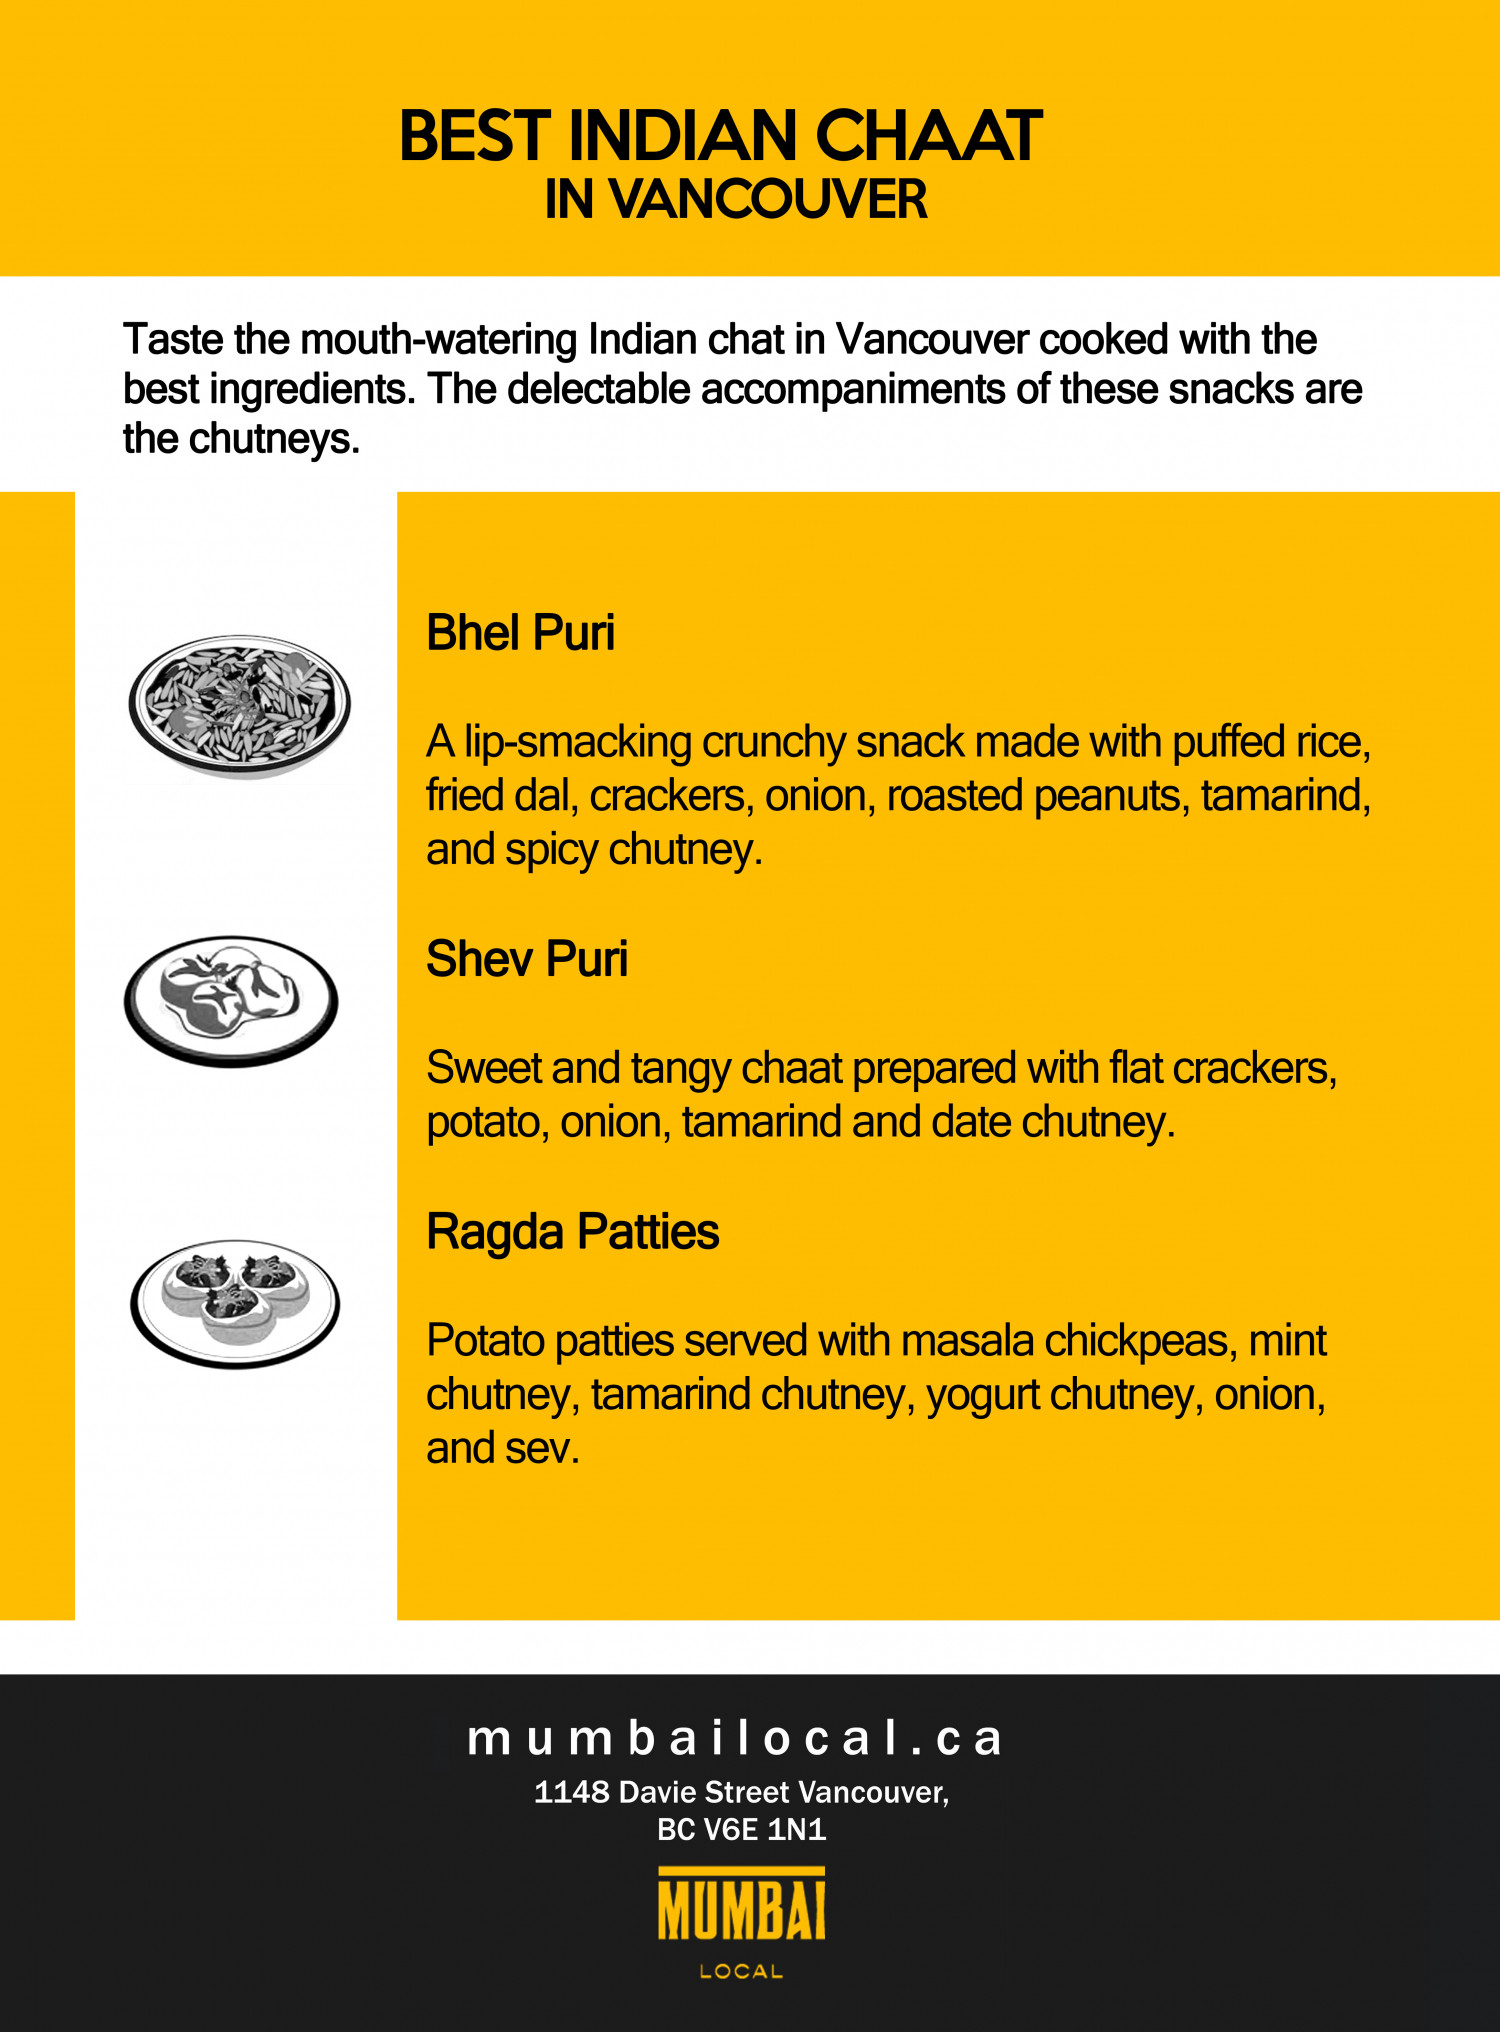 Best Indian Chaat in Vancouver Infographic